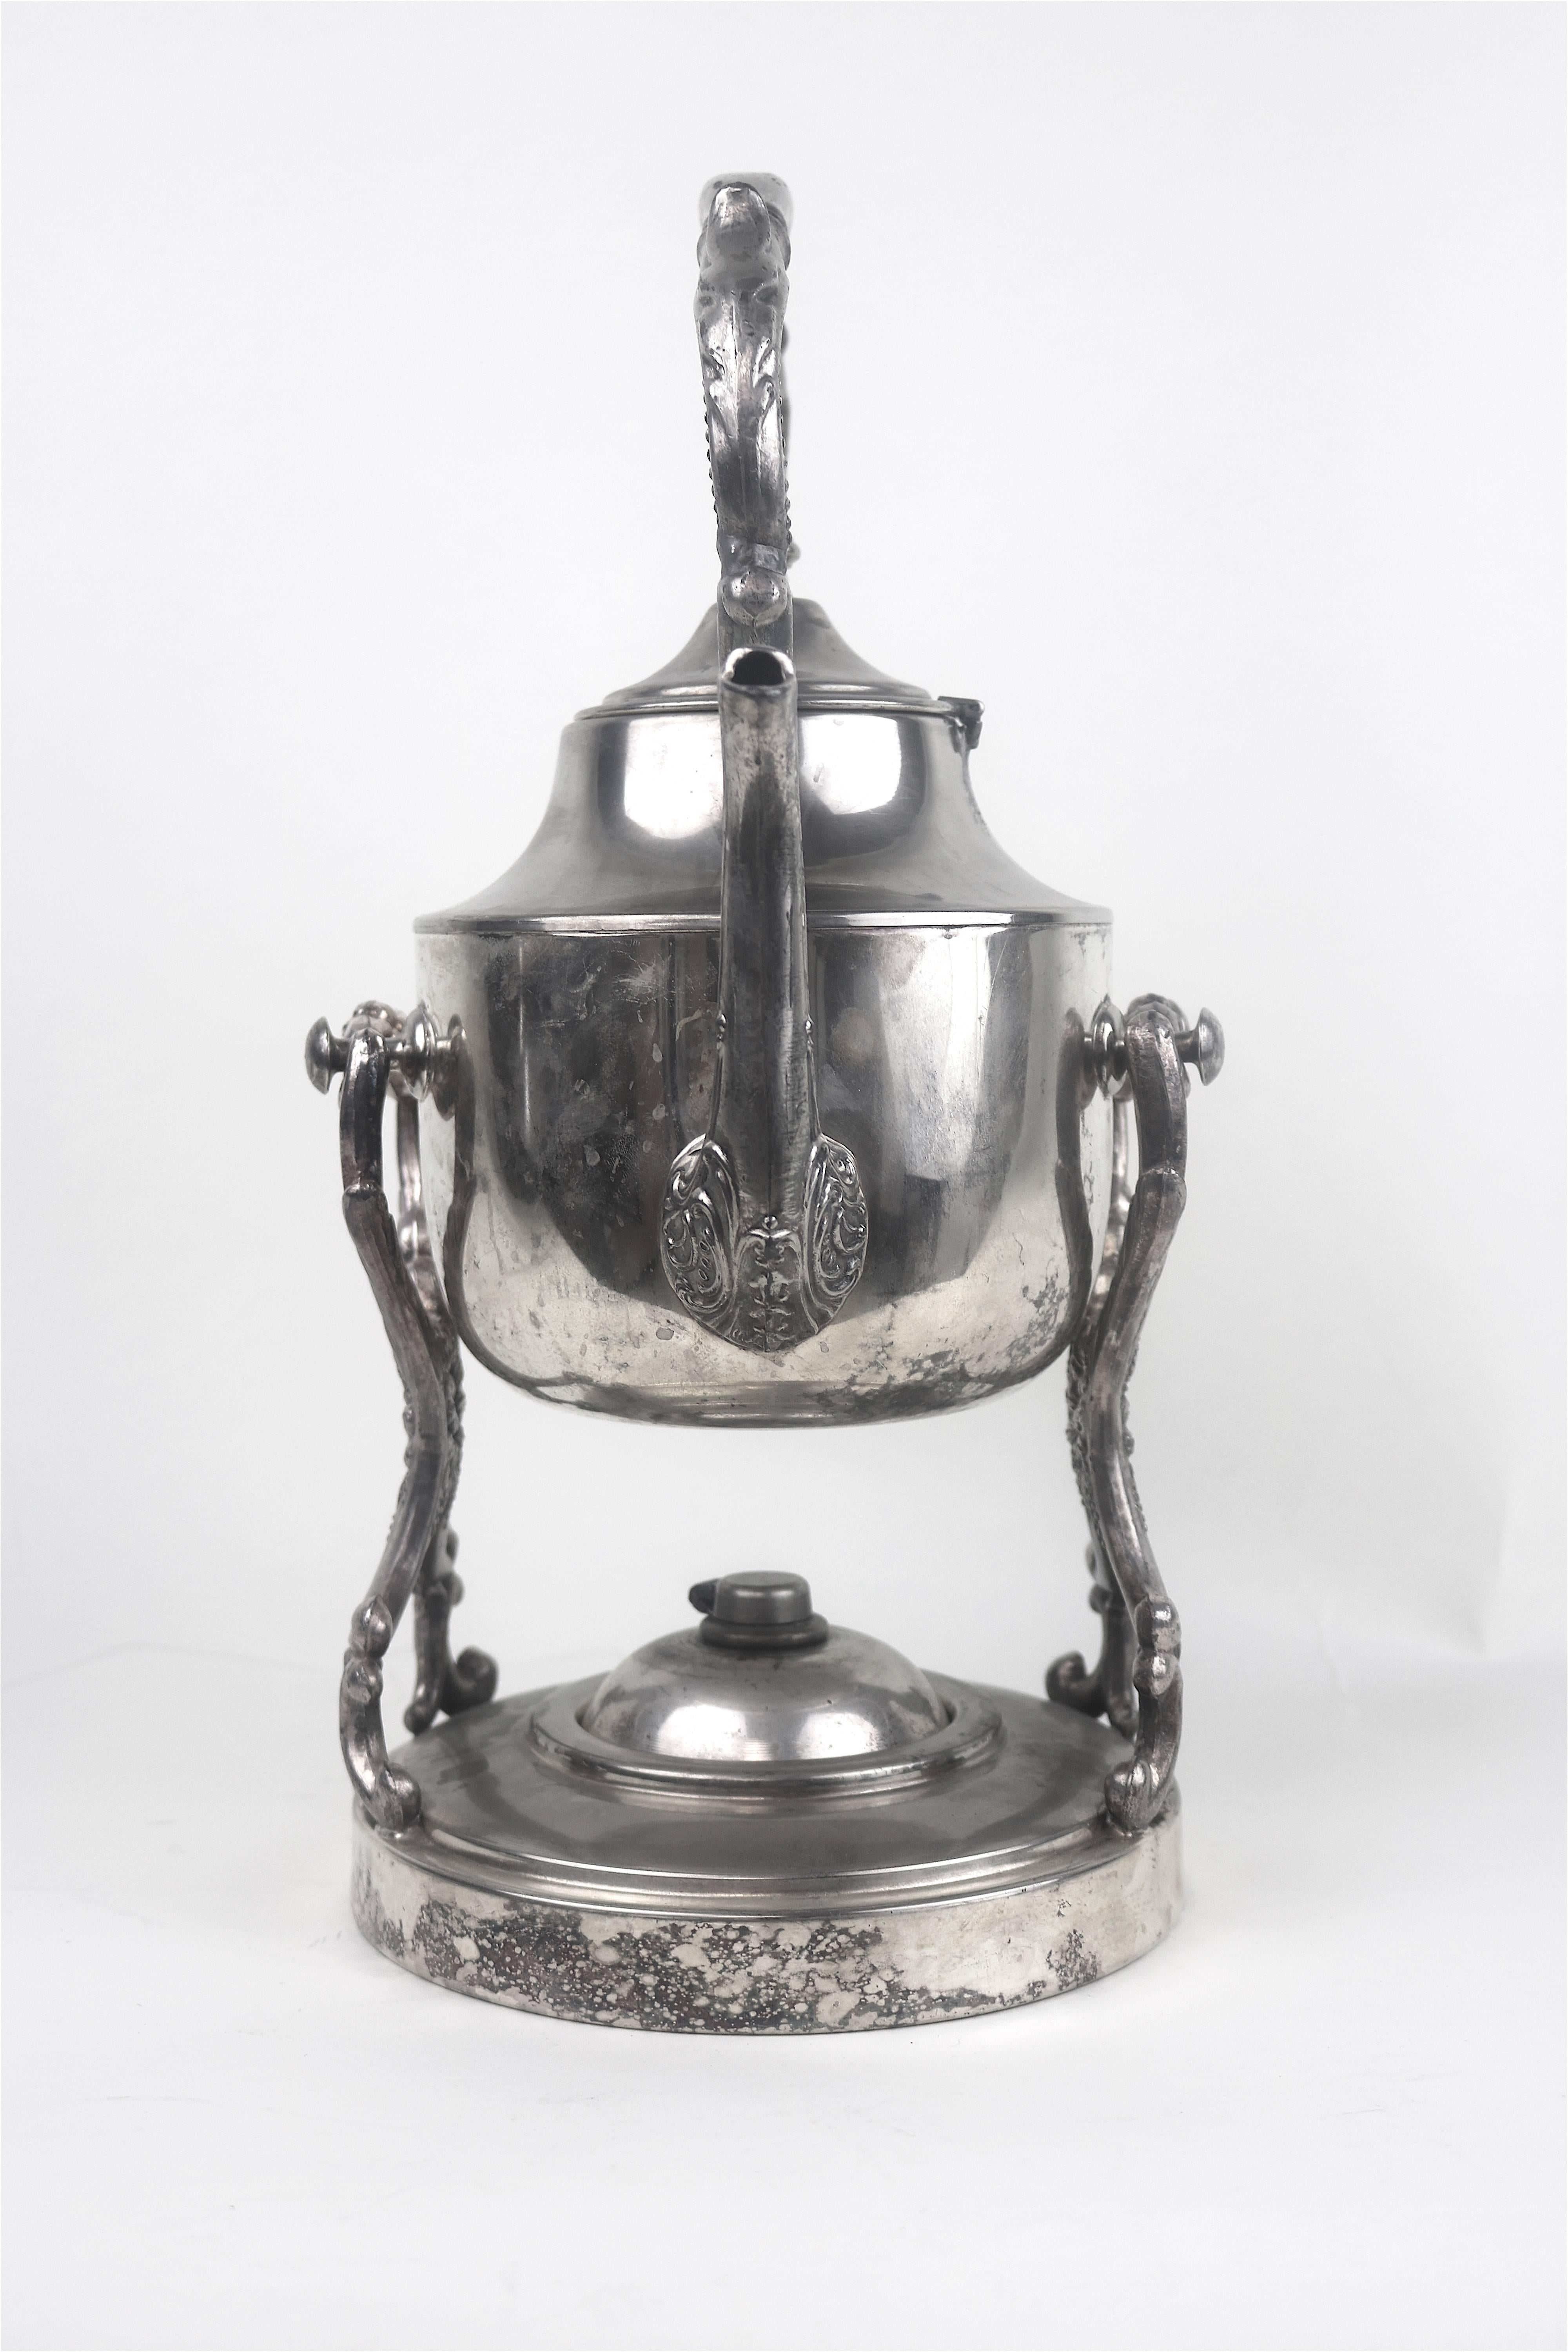 Georgian Style Silverplate Spirit Water Kettle--Tilt the pot while in the cradle a lovely feature to serve coffee tea or hot water-burner underneath the pot to keep liquids warm.
Made to impress on Your Party Table!!
Beautiful engraved repousse